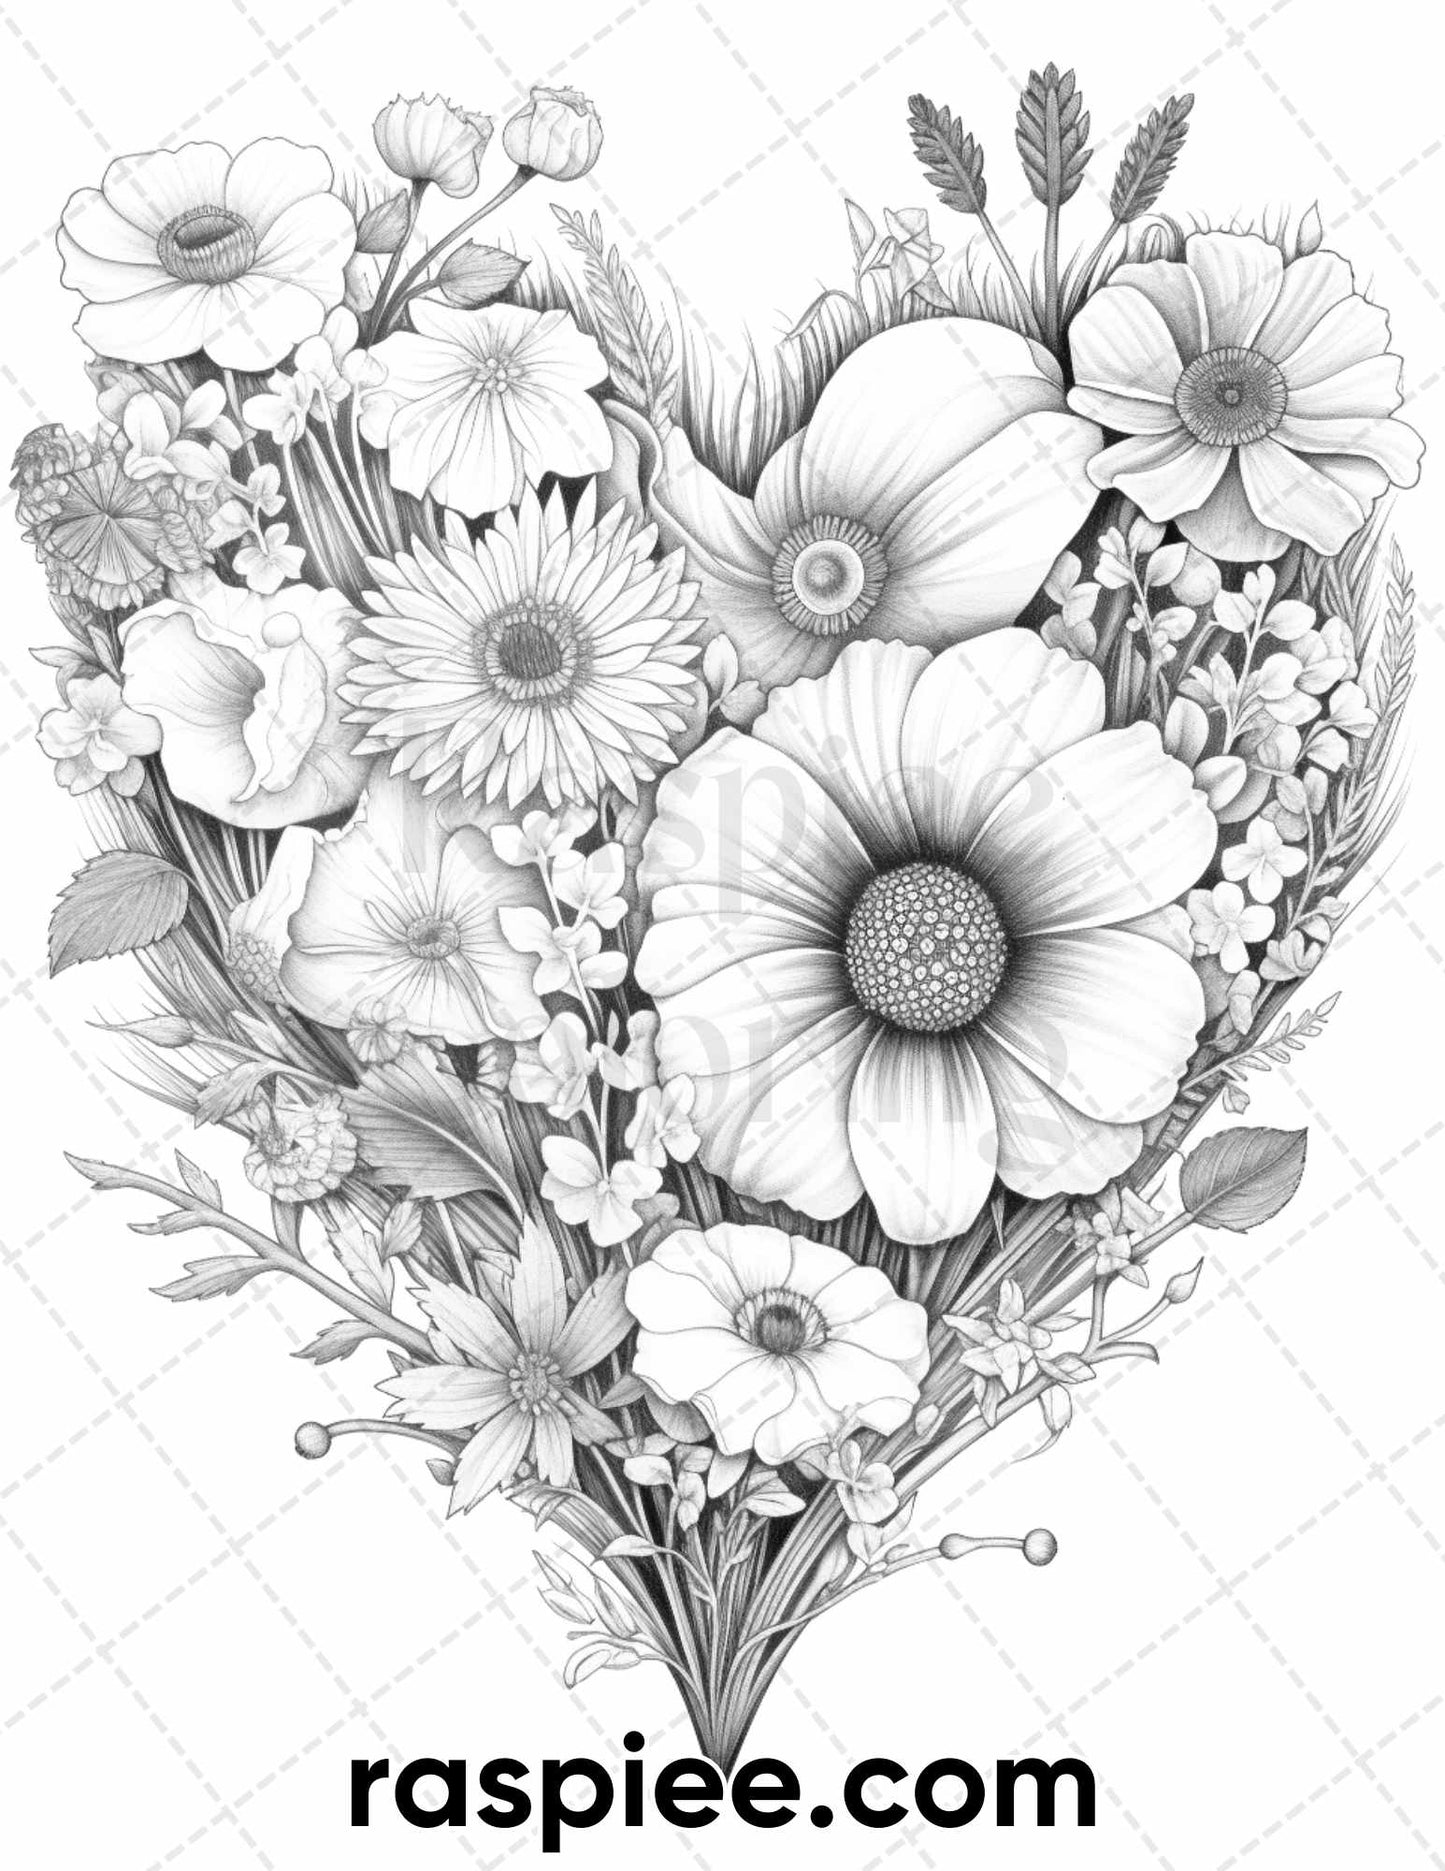 adult coloring pages, adult coloring sheets, adult coloring book pdf, adult coloring book printable, grayscale coloring pages, grayscale coloring books, spring coloring pages for adults, spring coloring book, holiday coloring pages for adults, valentine's day coloring pages, valentine coloring book, flower coloring pages for adults, flower coloring book